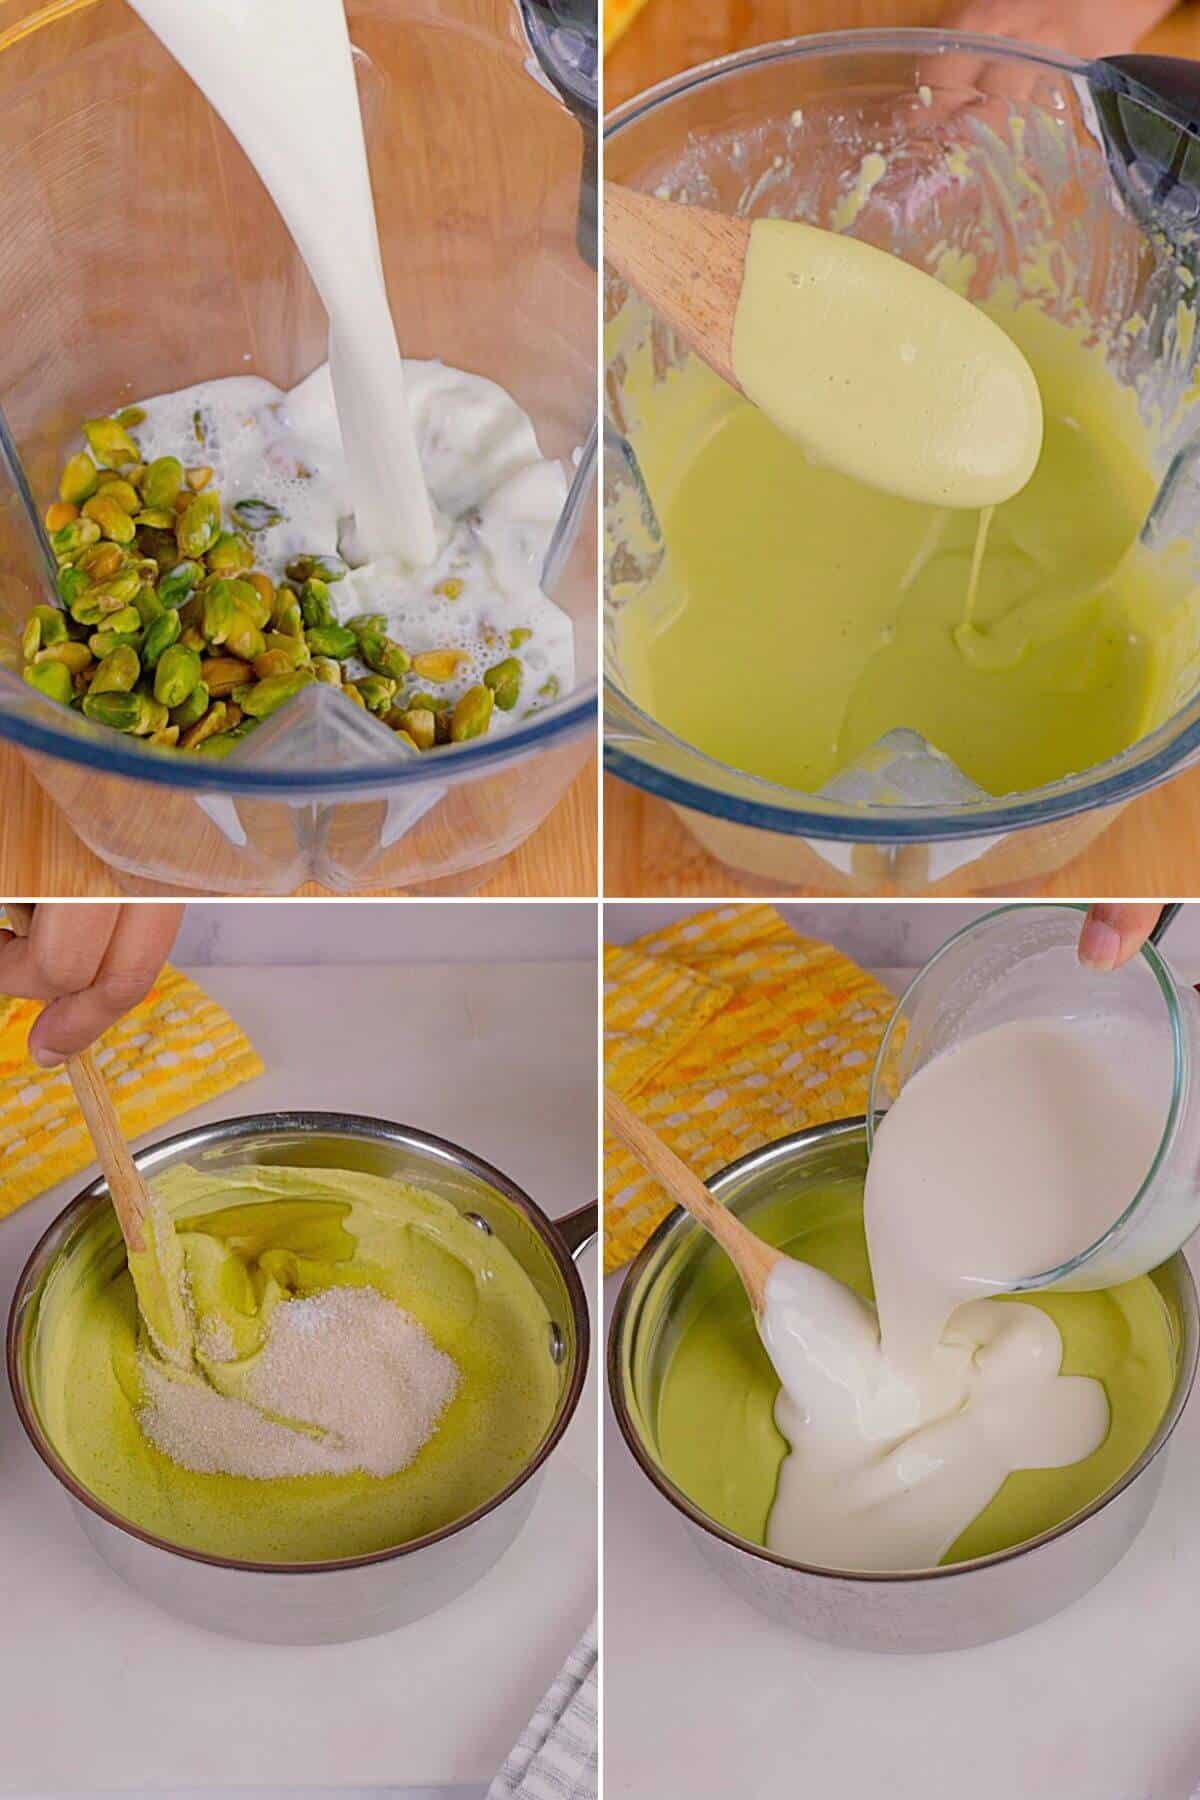 Blending pistachios and making the gelato base.